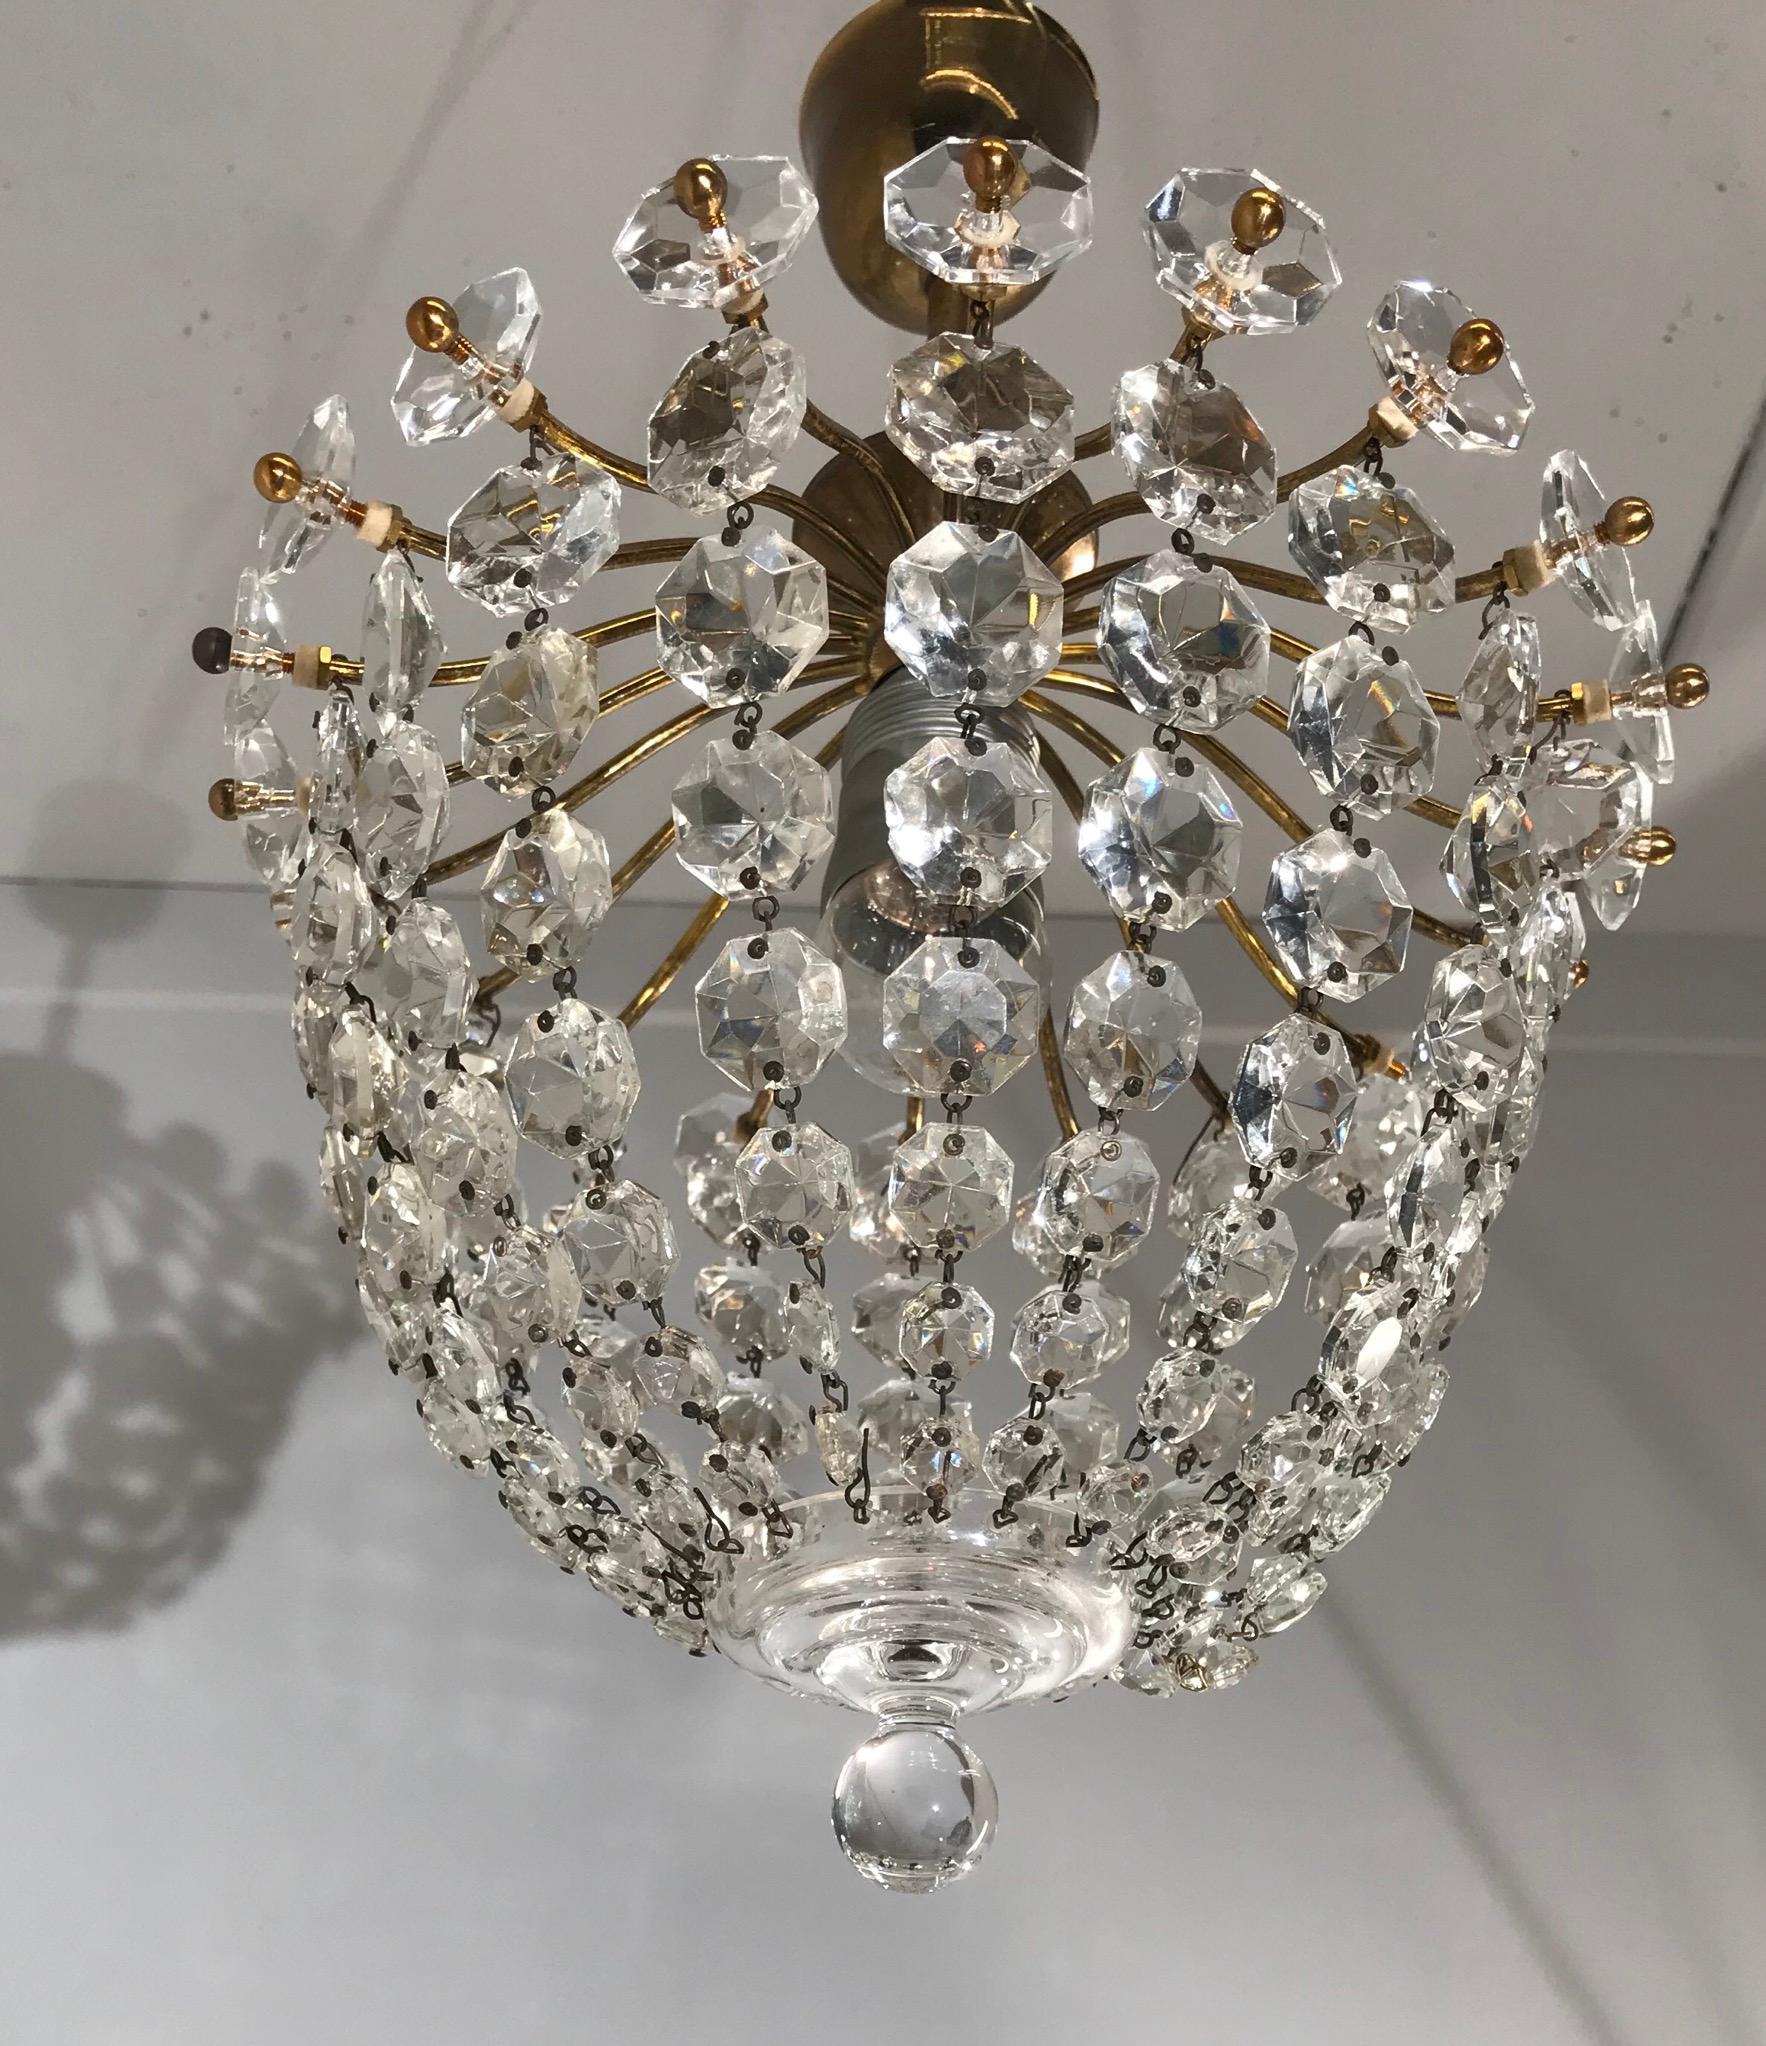 Beautiful and excellent condition, 1950s pendant.

If you are looking for a small size, but elegant and well made pendant to grace your hallway, landing or bedroom then this midcentury light fixture could be perfect for you. Both with the light